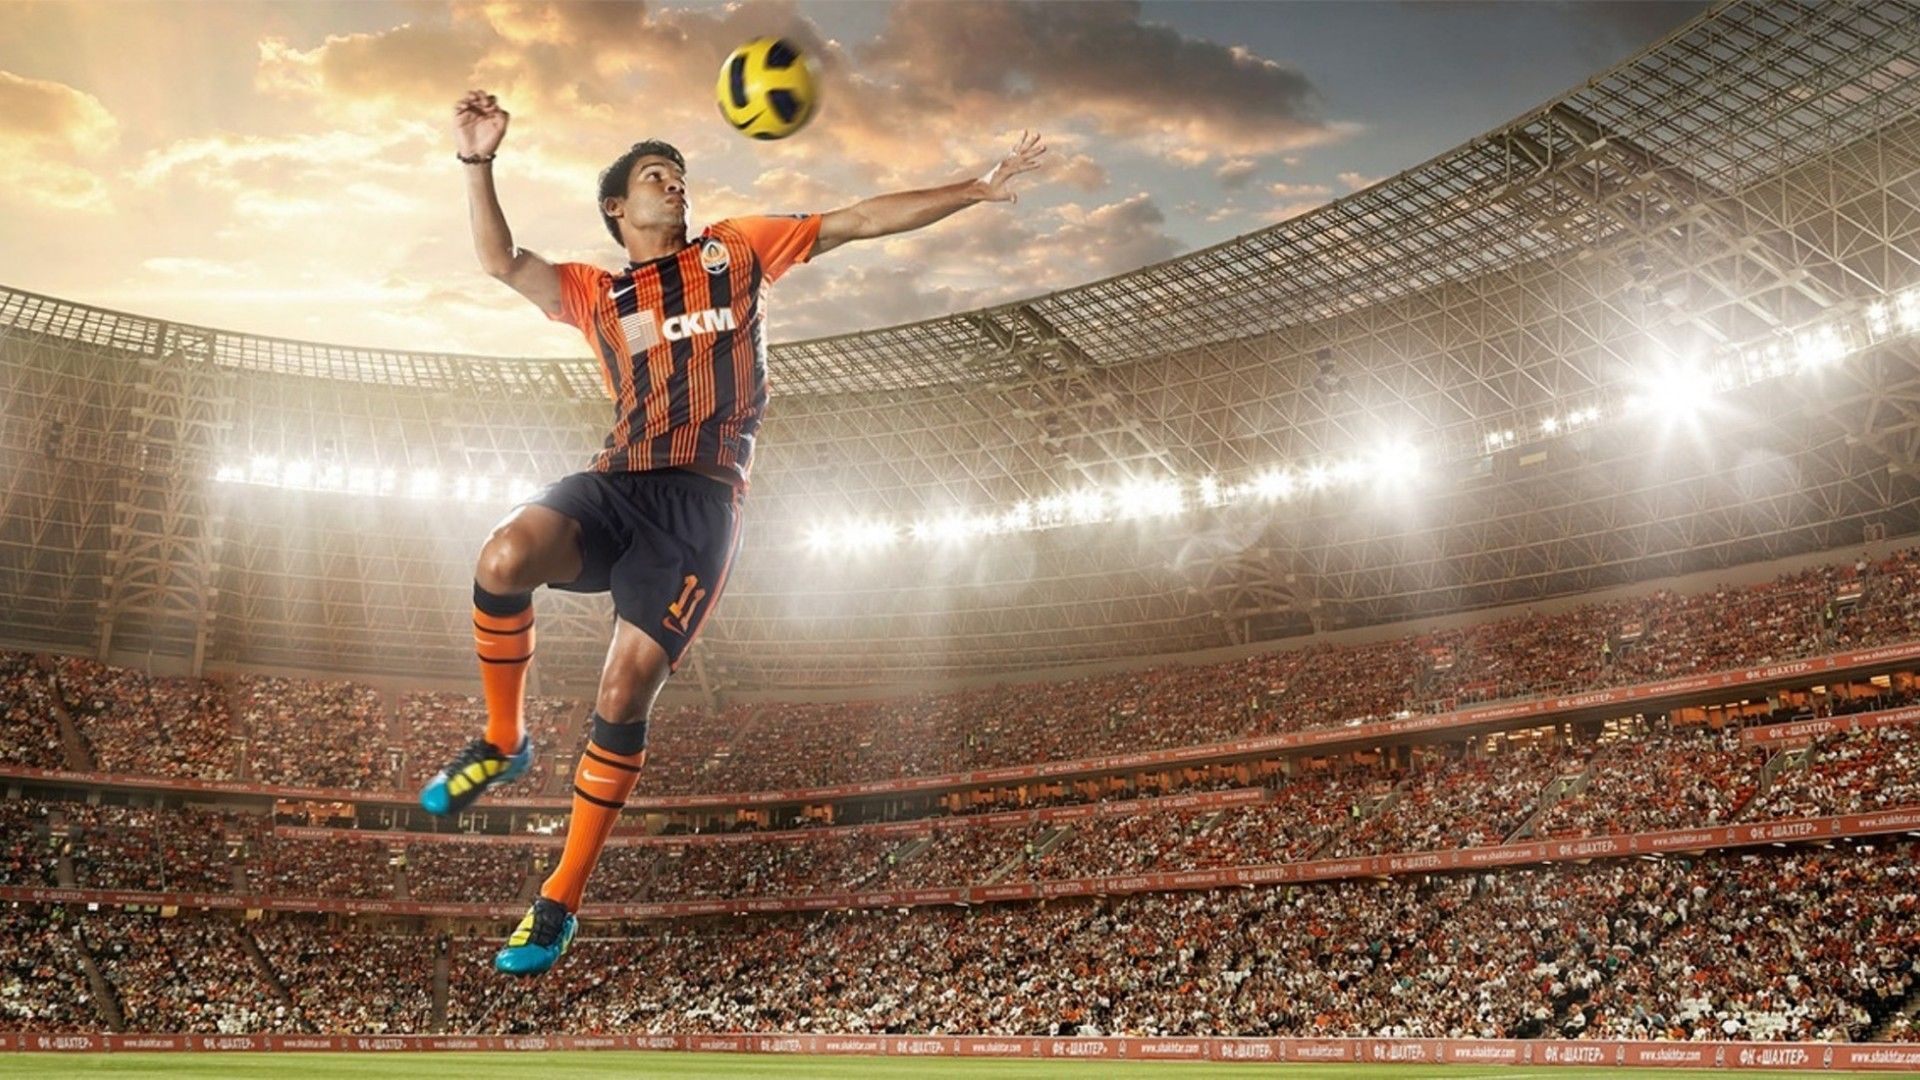 Soccer player hits the ball wallpapers and images - wallpapers ...